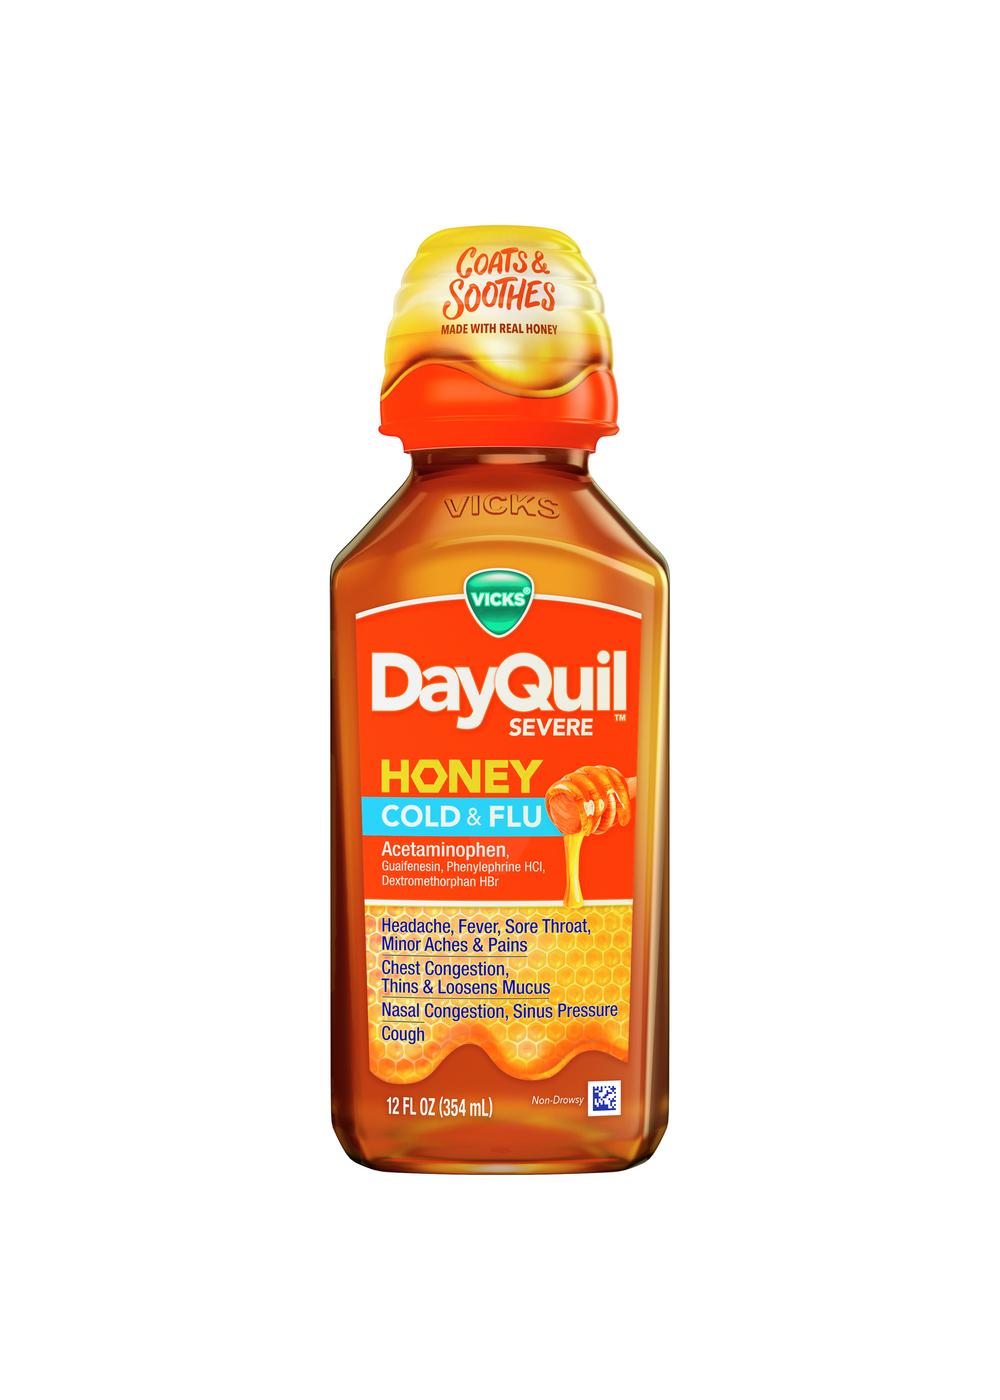 Vicks DayQuil SEVERE Cold & Flu Liquid - Honey; image 1 of 11